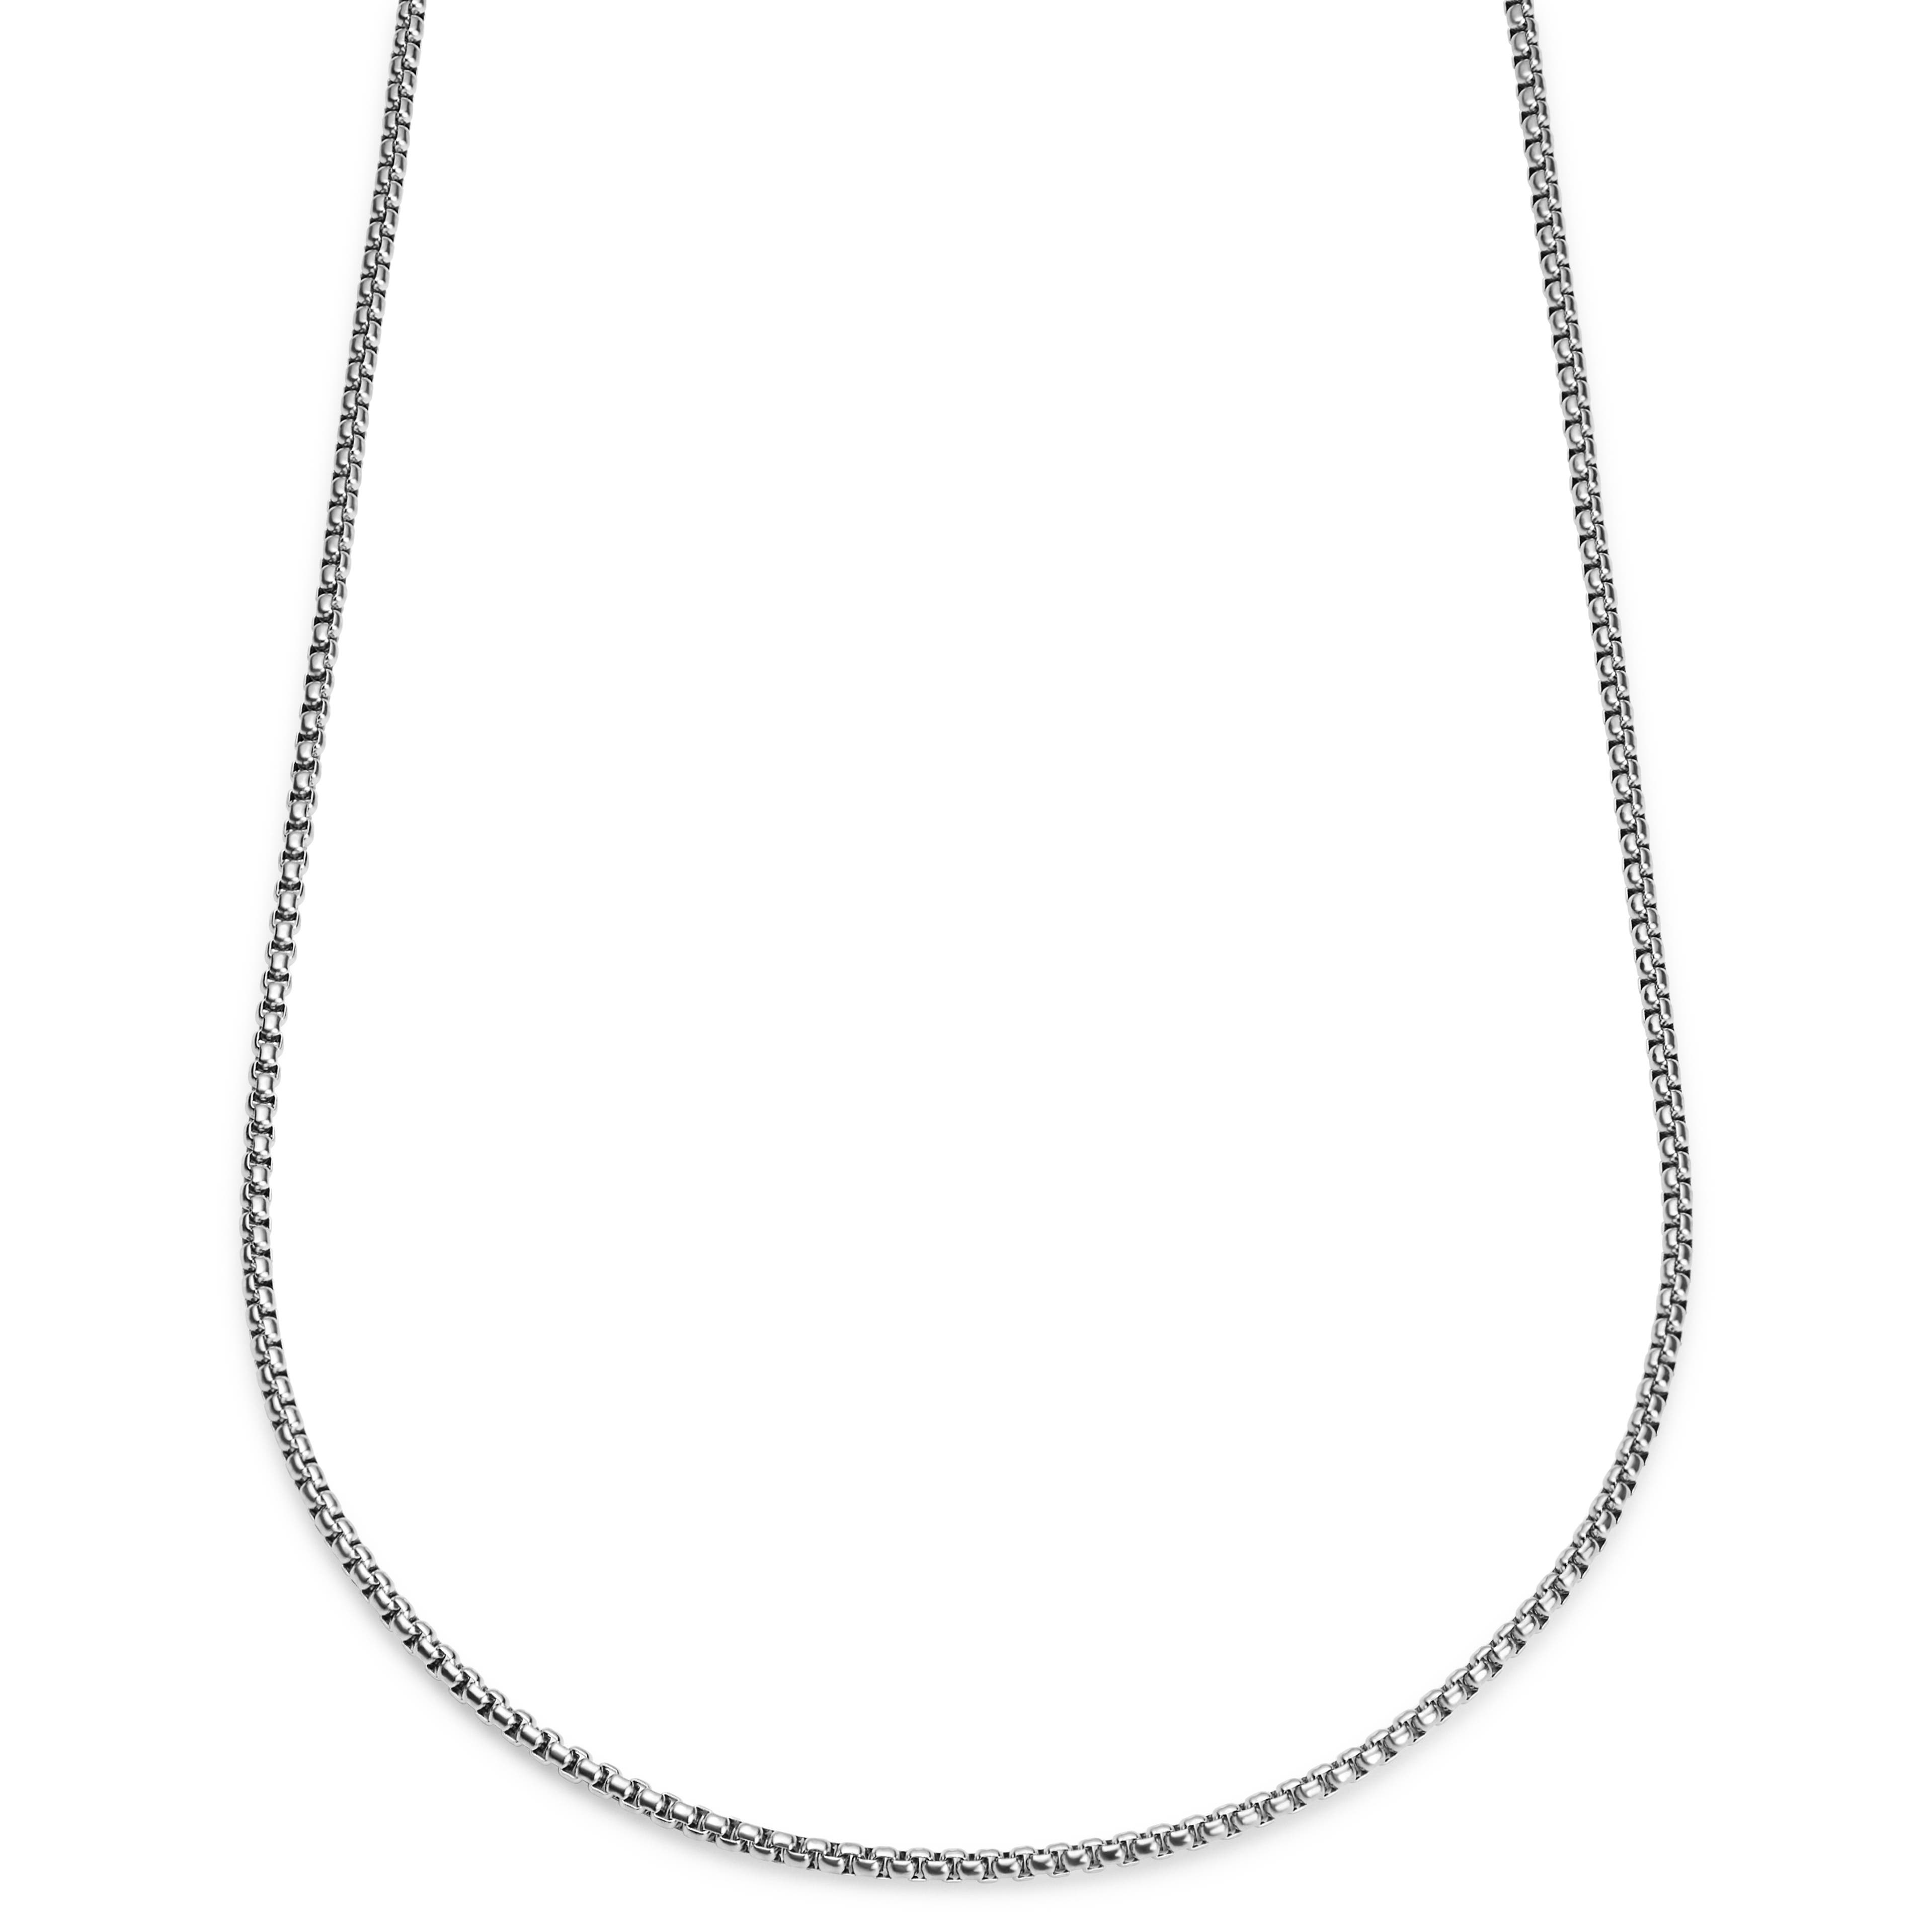 Essentials | 3 mm Silver-Tone Curved Box Chain Necklace